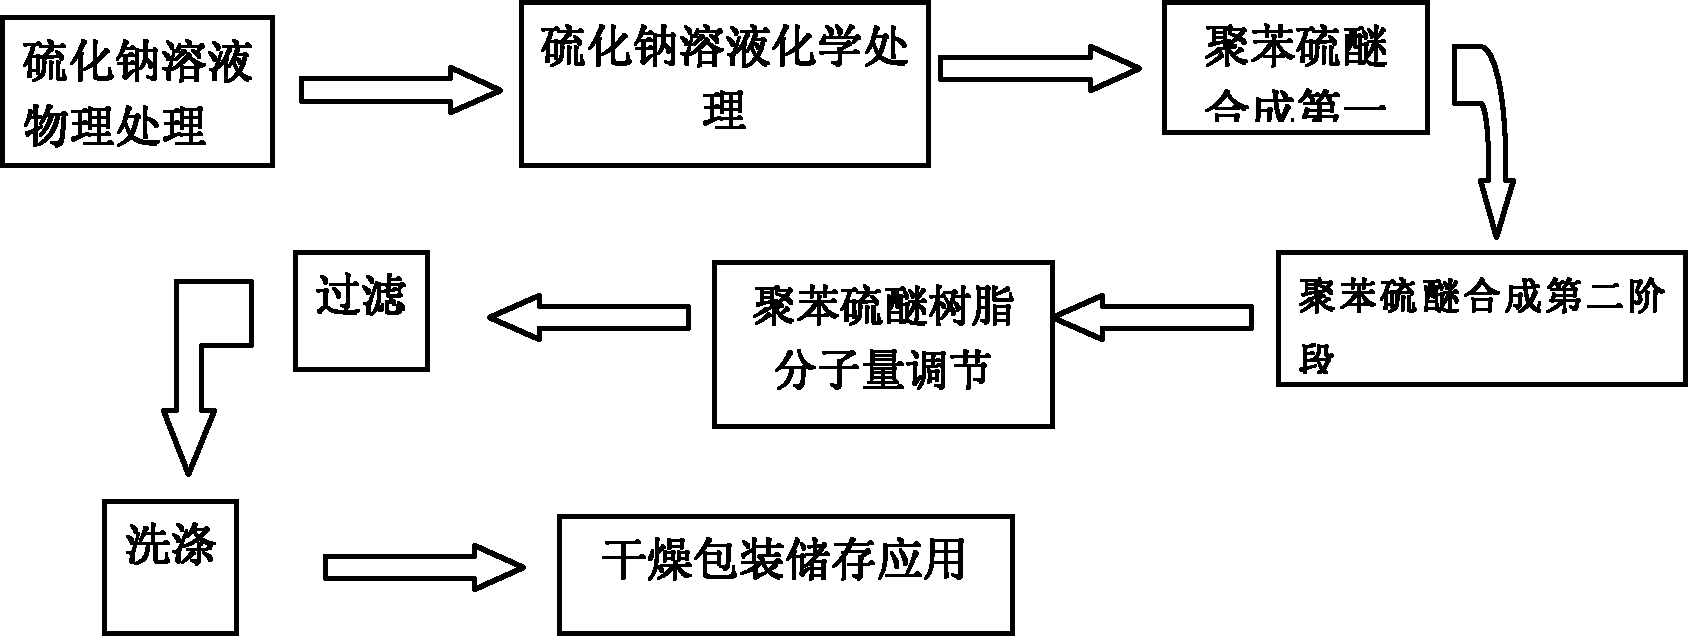 Synthesis process for polyphenylene sulfide resin